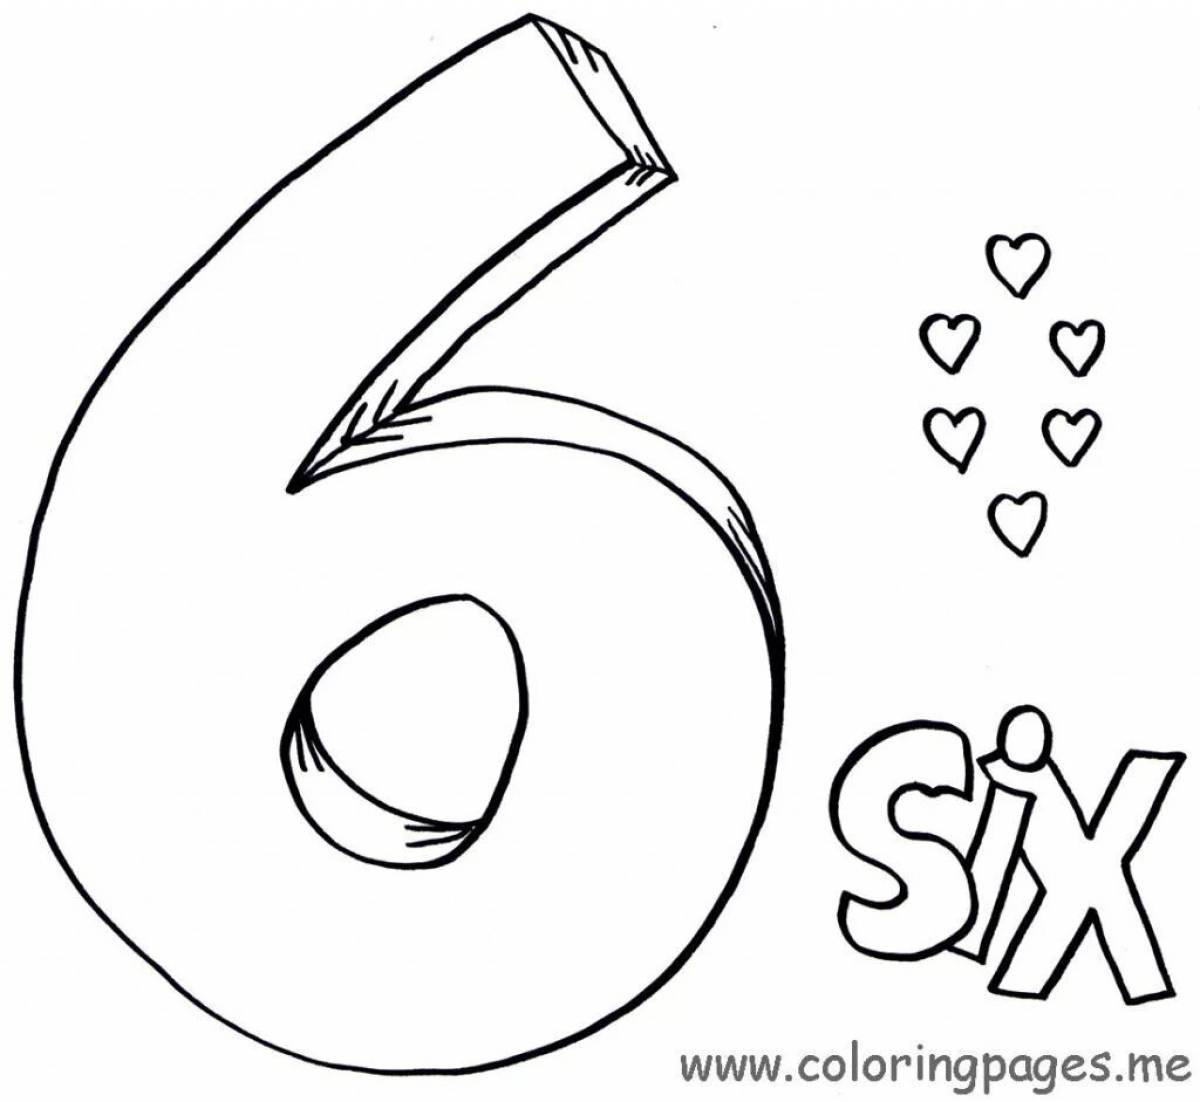 A fun coloring book with numbers in English for kids